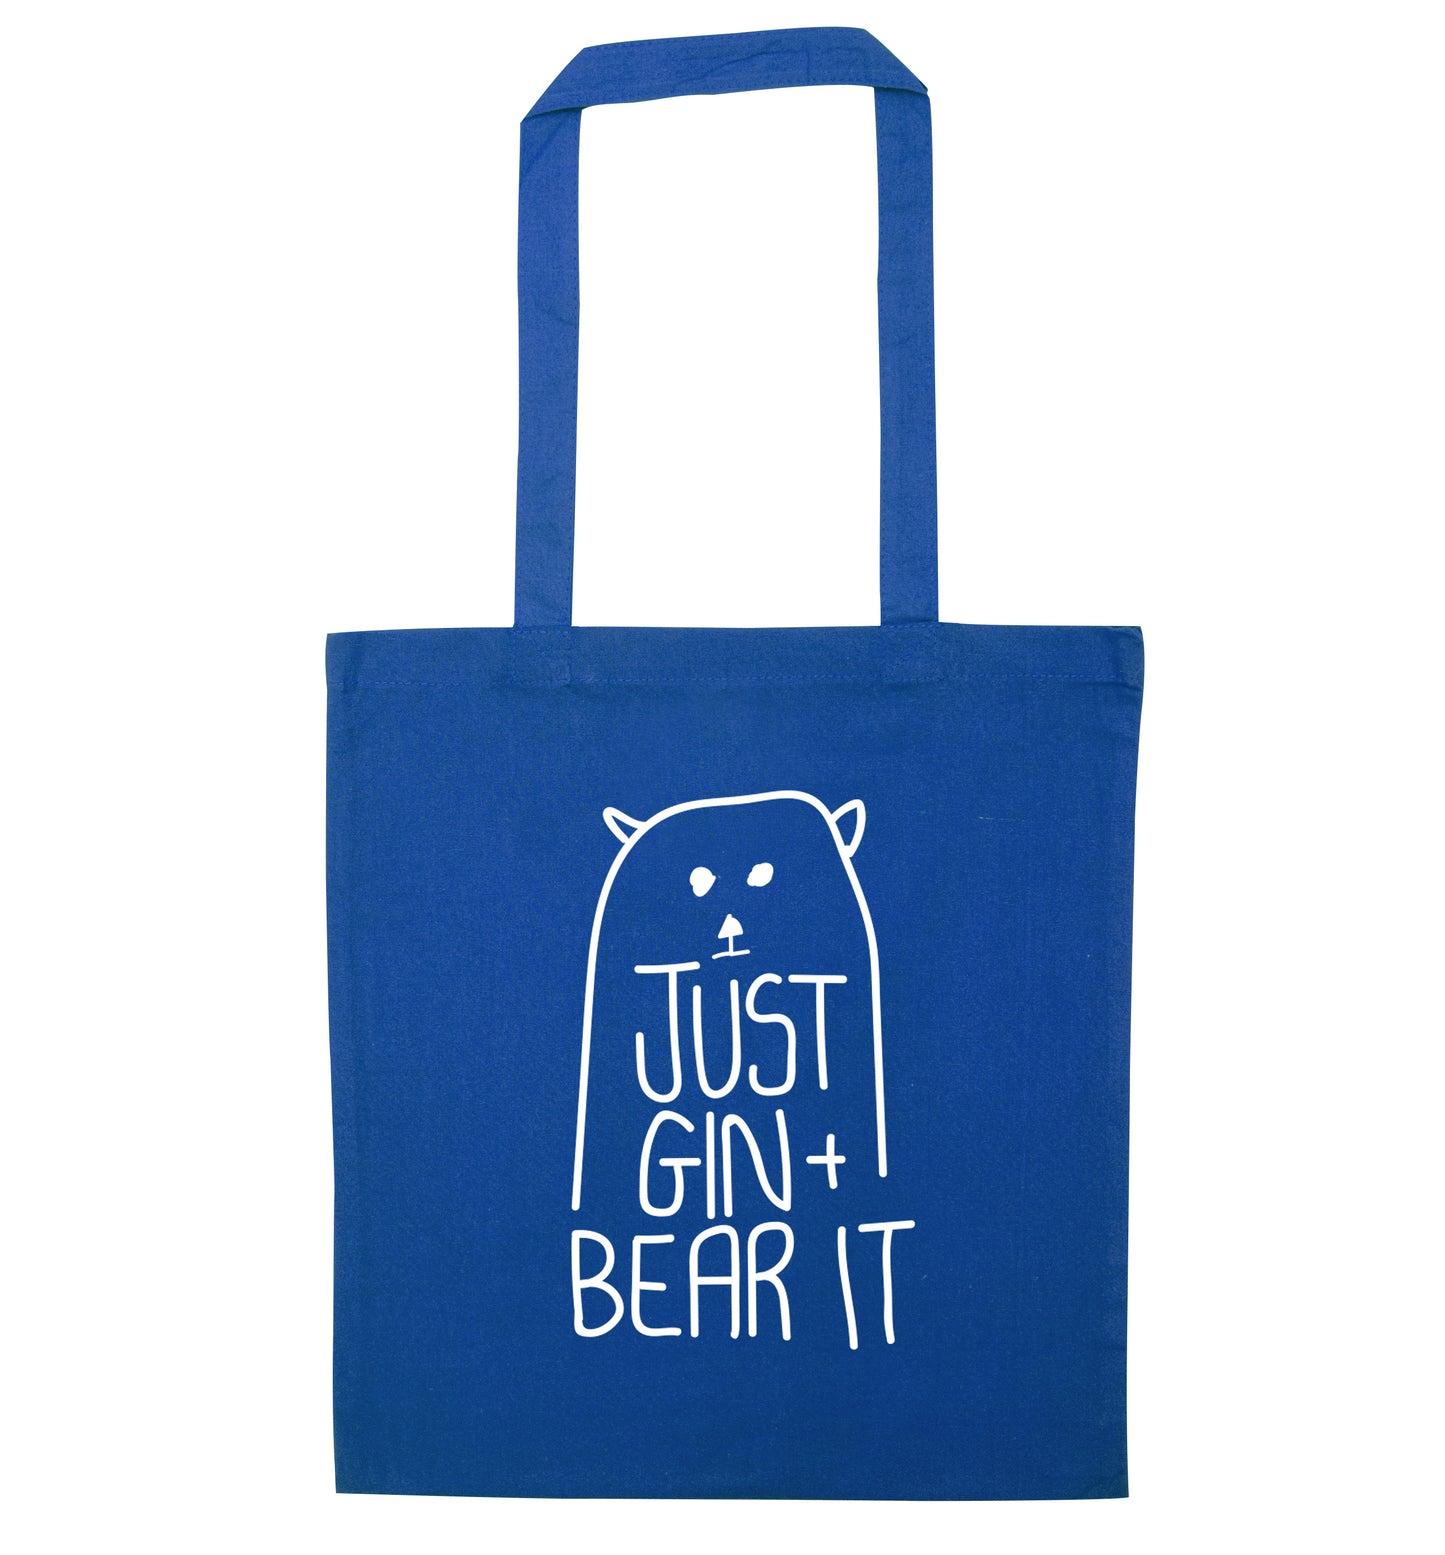 Just gin and bear it blue tote bag